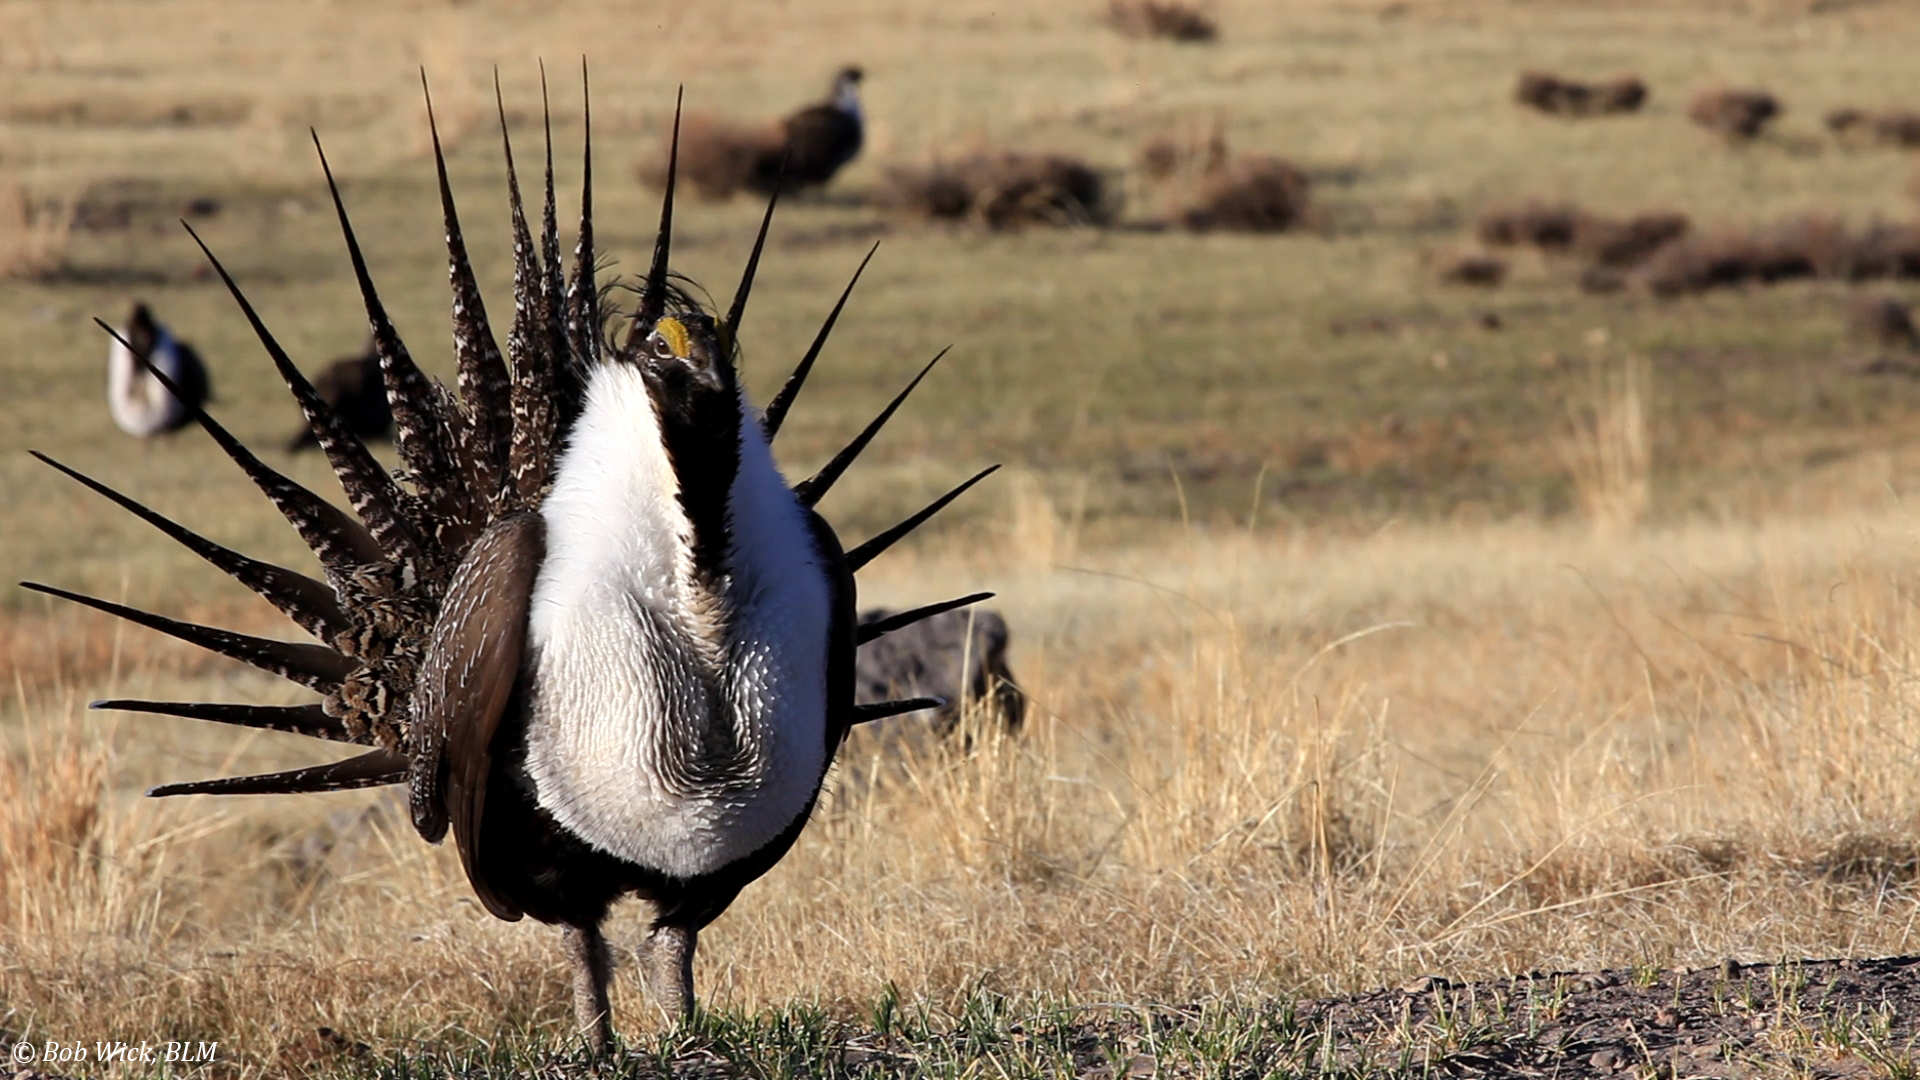 A Sage Grouse shows off his plumage.